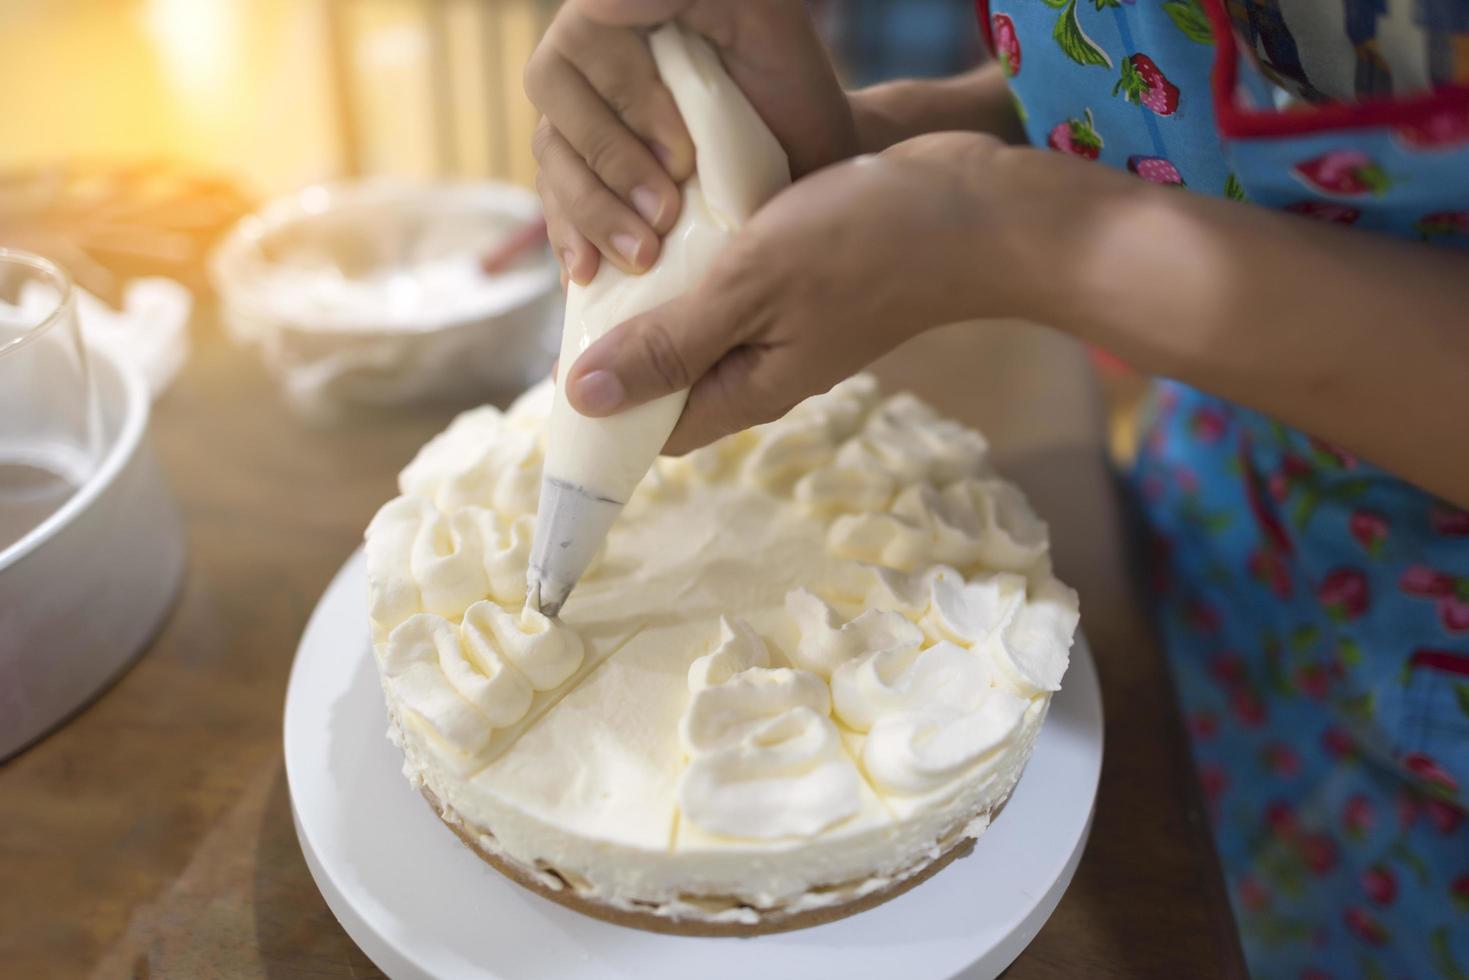 Woman's hand decorating a cake with a pastry cream bag photo